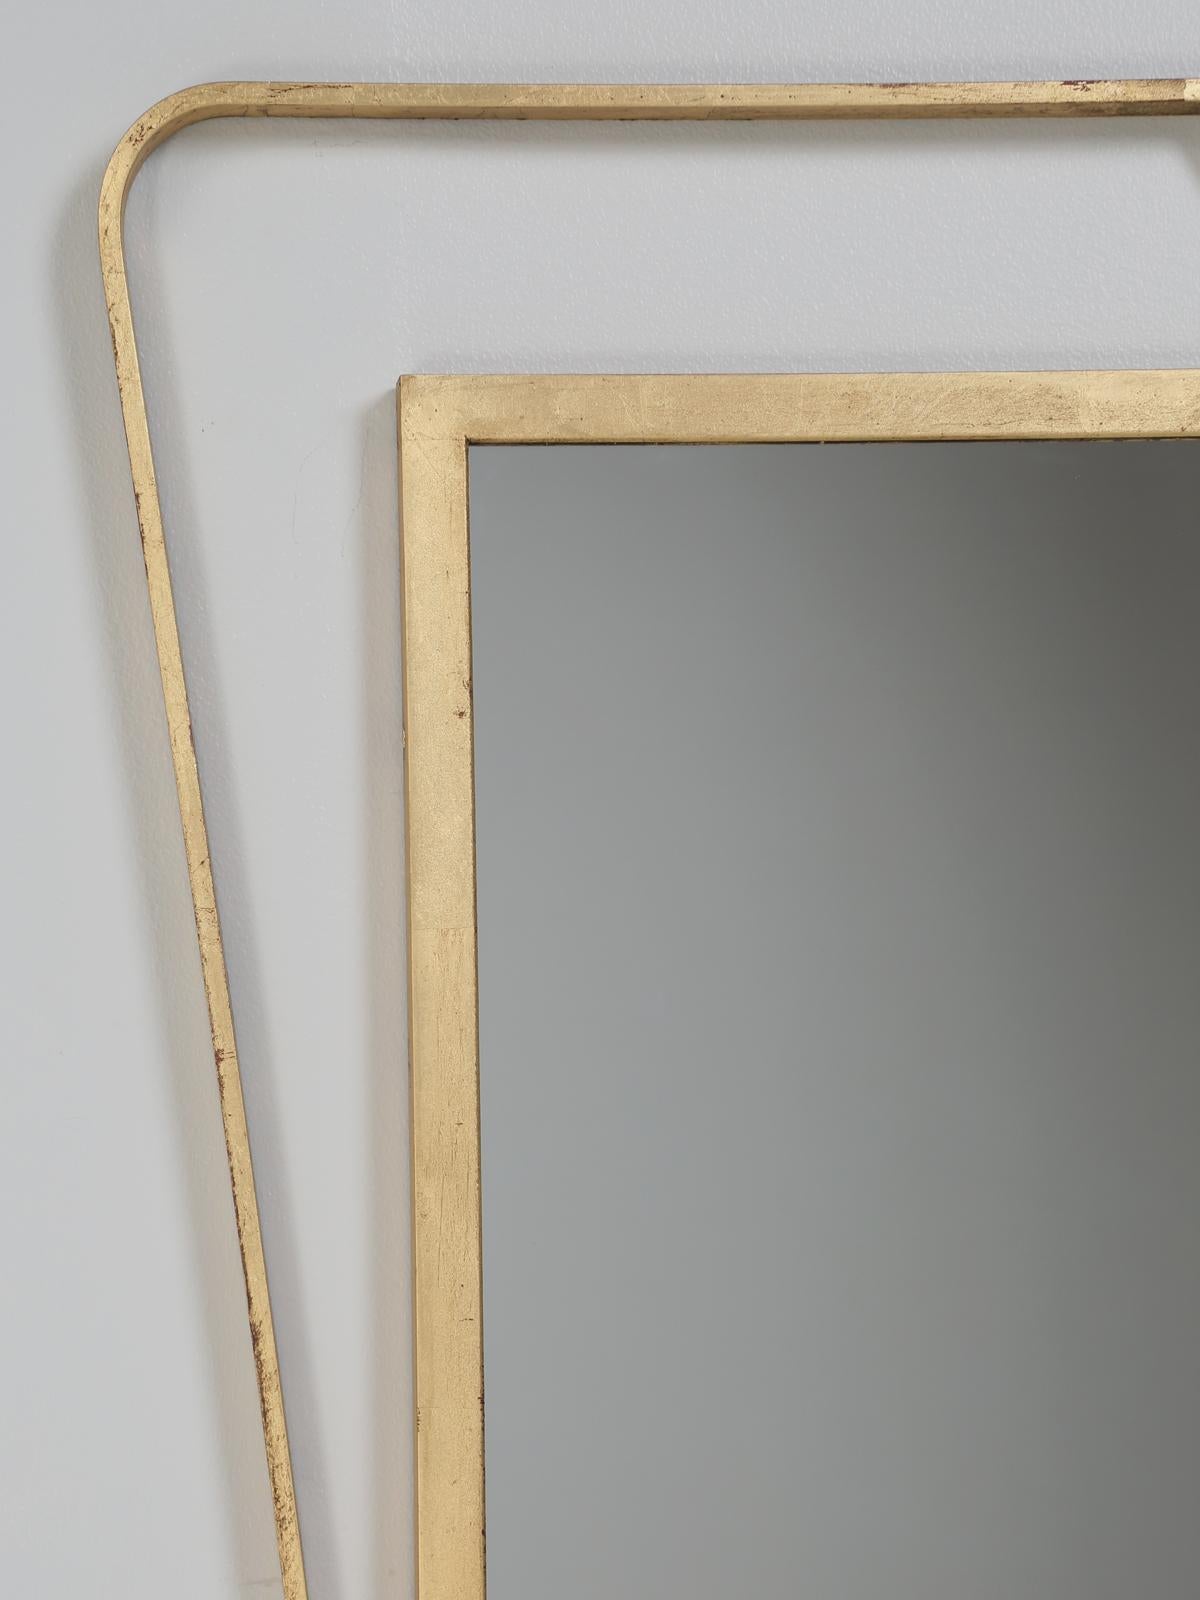 Custom made wall mounted Mid-Century Modern mirror by Old Plank in the dimension of your choosing. Listed is our hand-applied old fashion gilt finish with the red undertones, although you can spec out whatever finish you would like on our modern